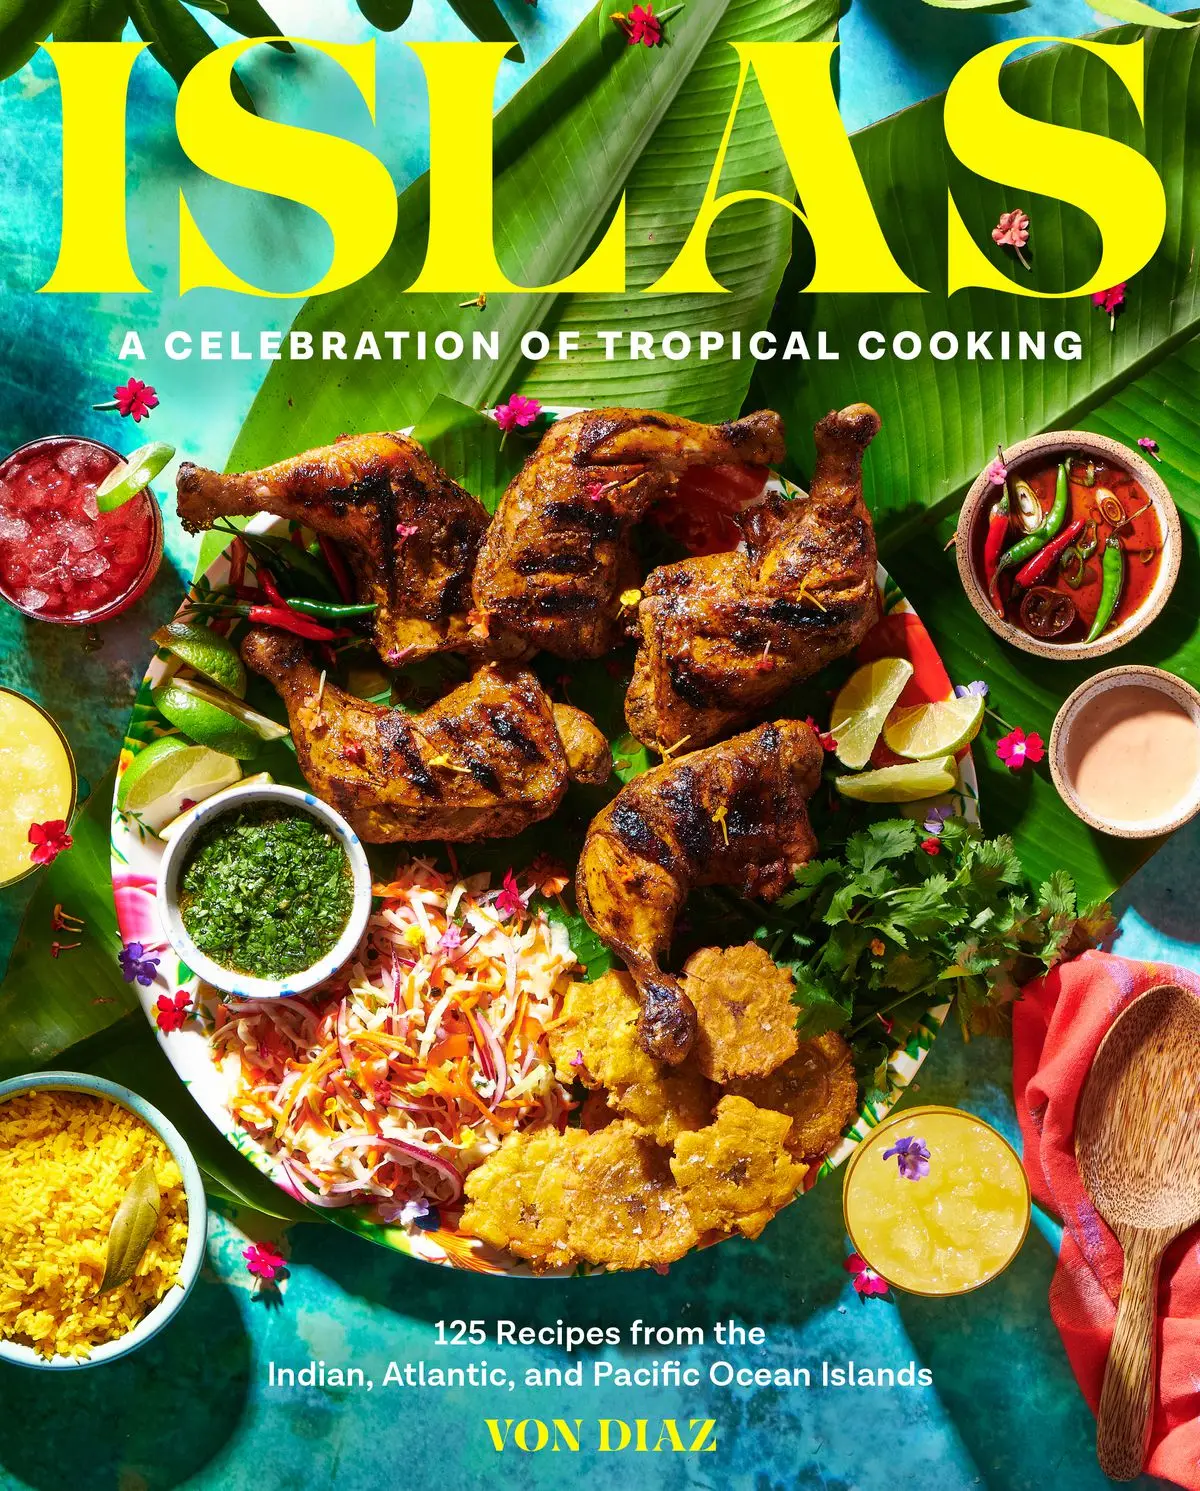 The cover of Islas